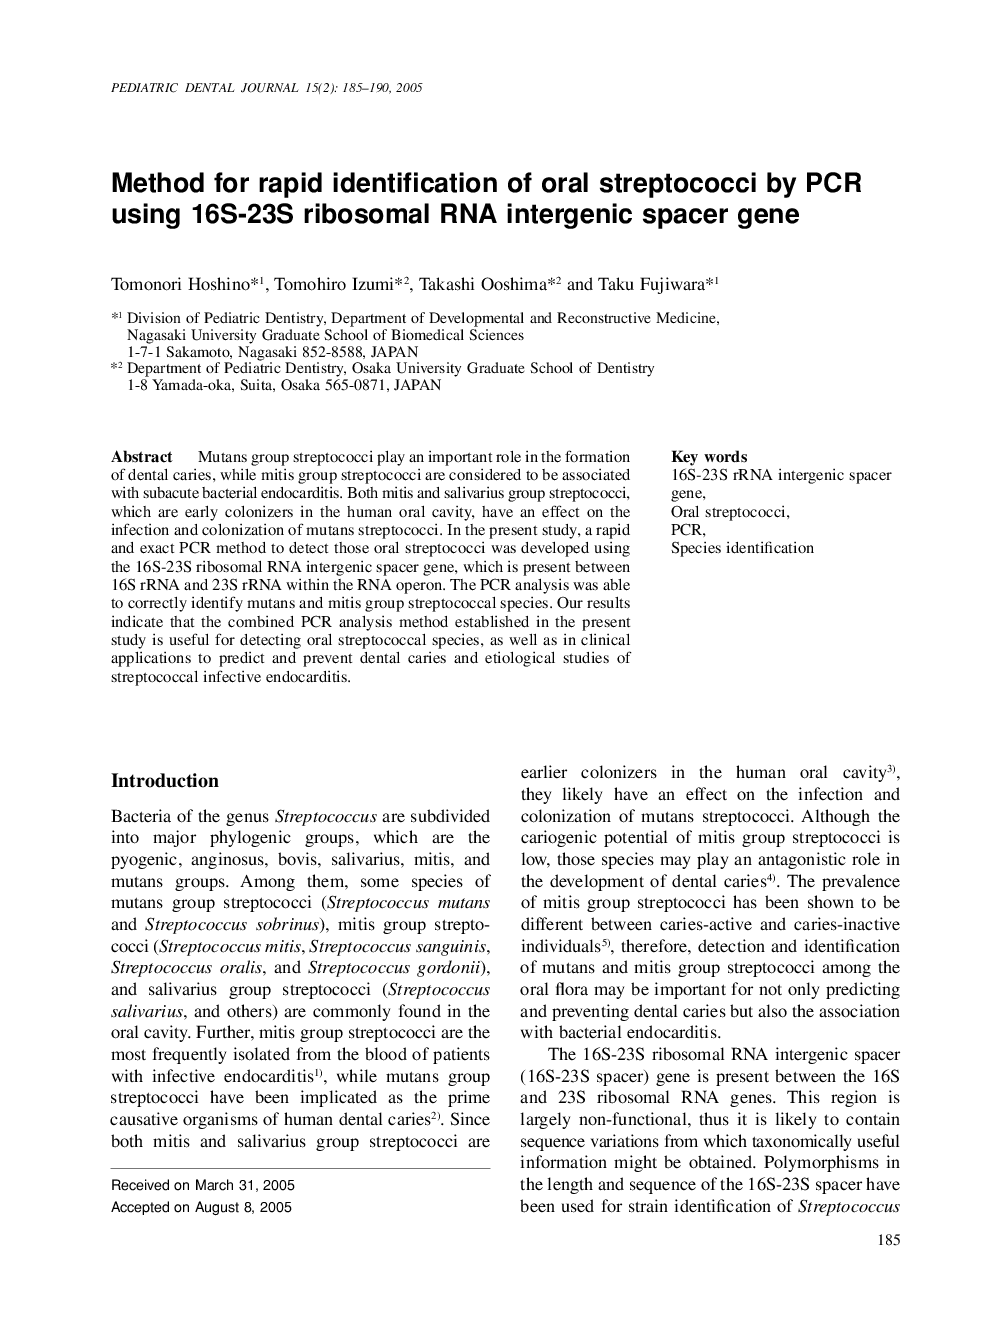 Method for rapid identification of oral streptococci by PCR using 16S-23S ribosomal RNA intergenic spacer gene